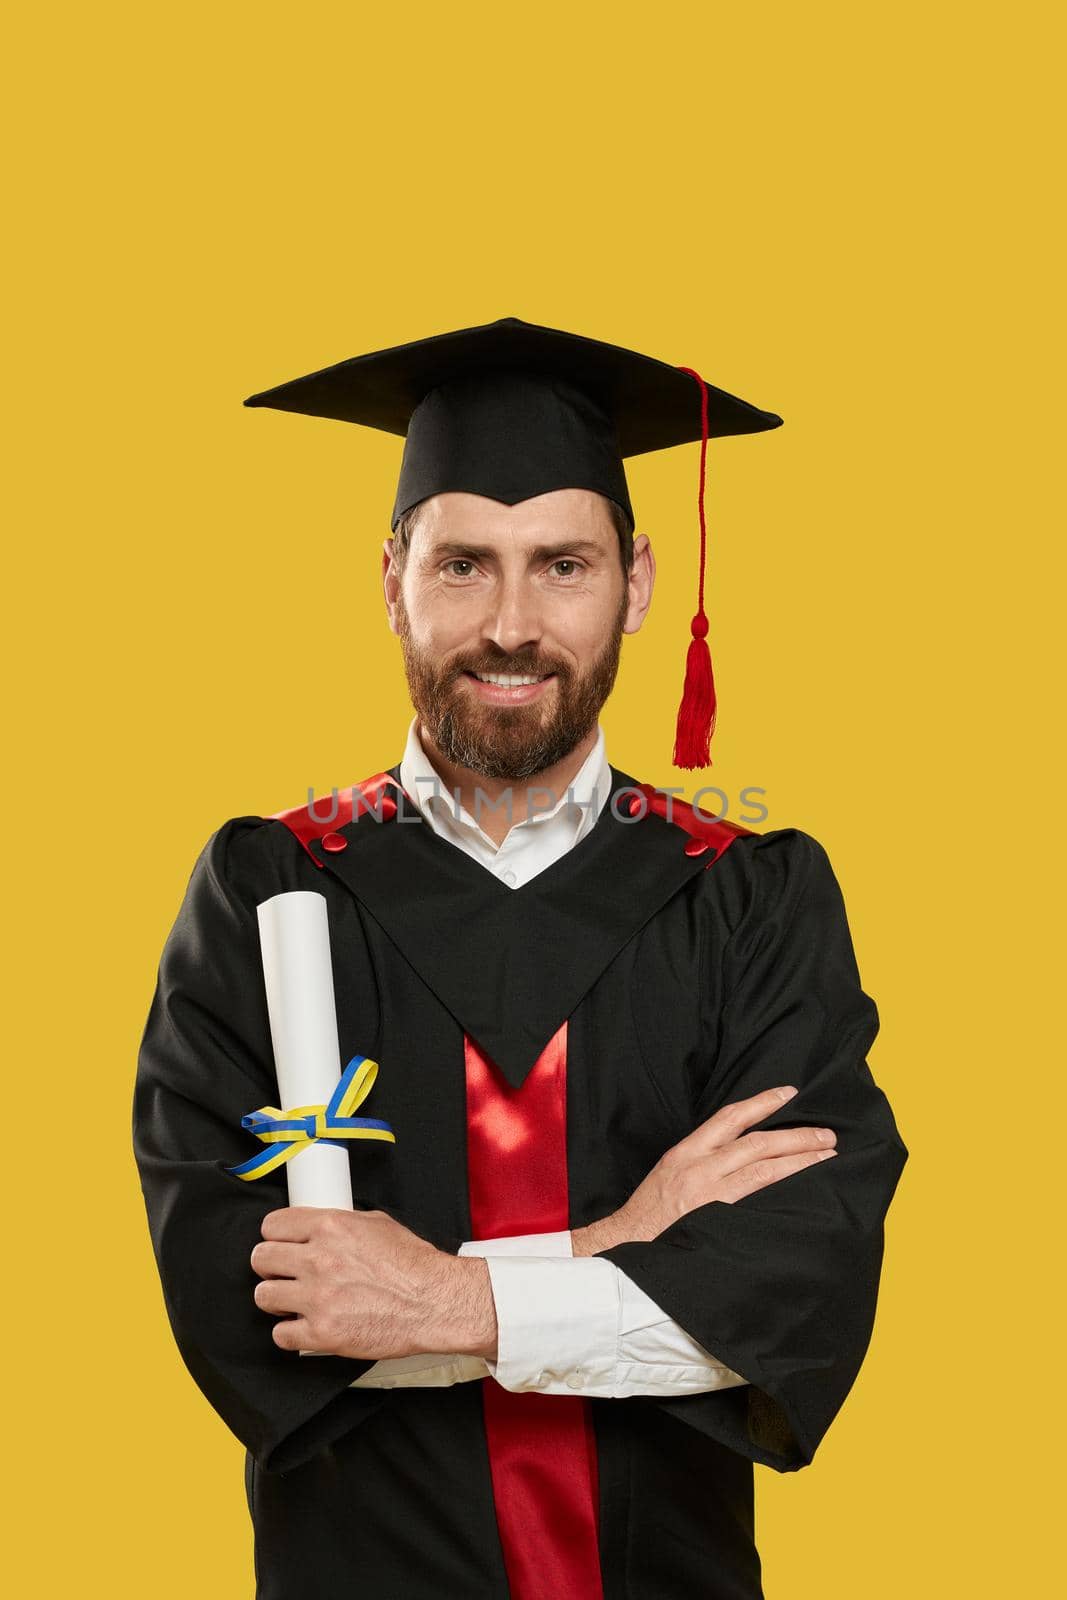 Front view of man with beard graduating from university, college. Graduate wearing mortarboard standing with crossed hands, smiling, holding diploma. Concept of high school.